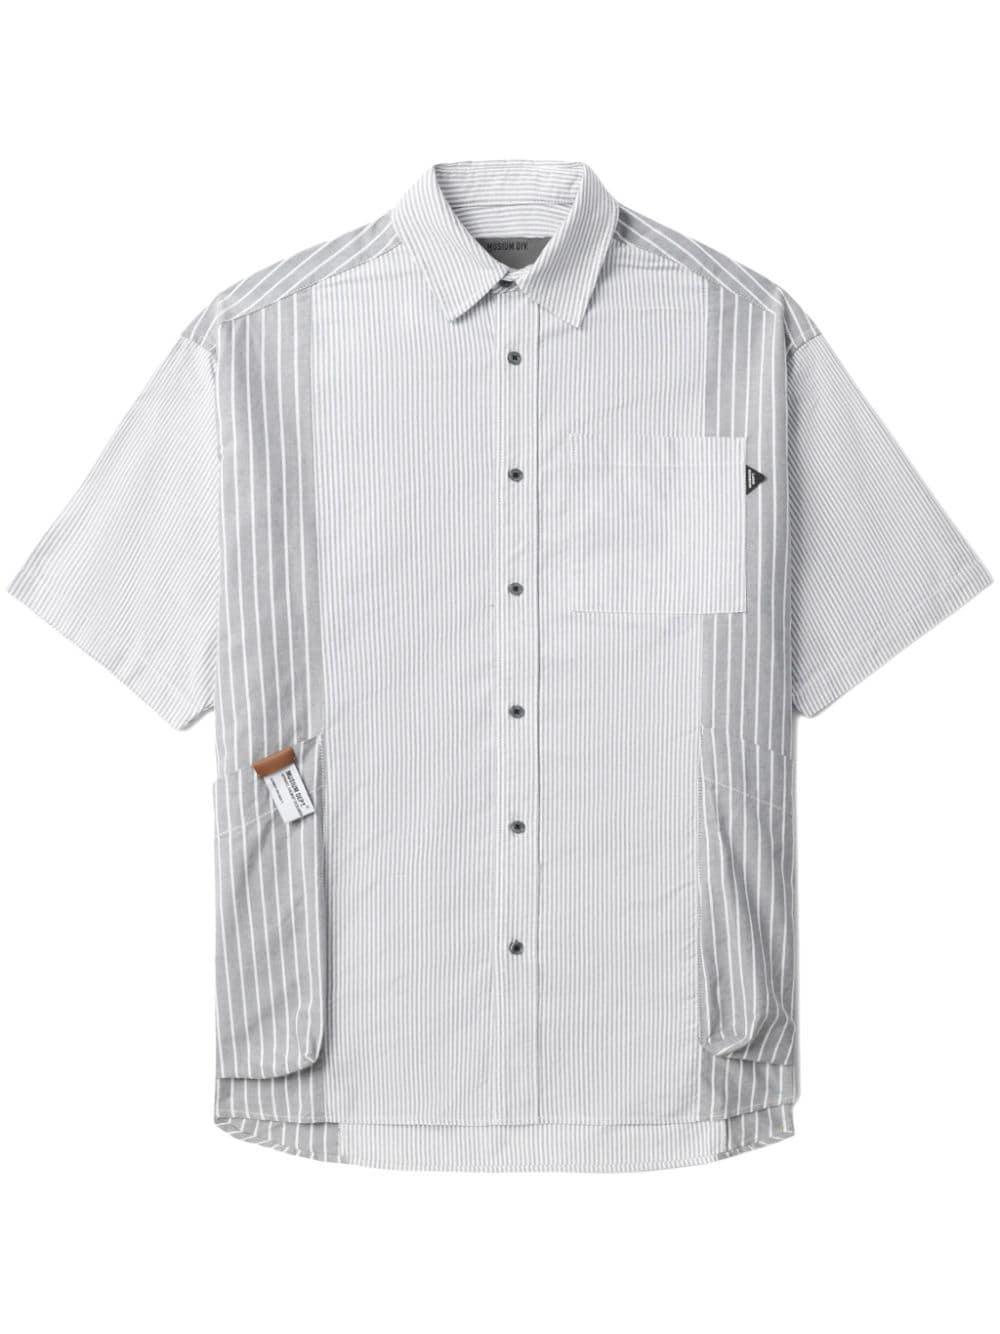 Musium Div. Striped Cotton Shirt In Gray